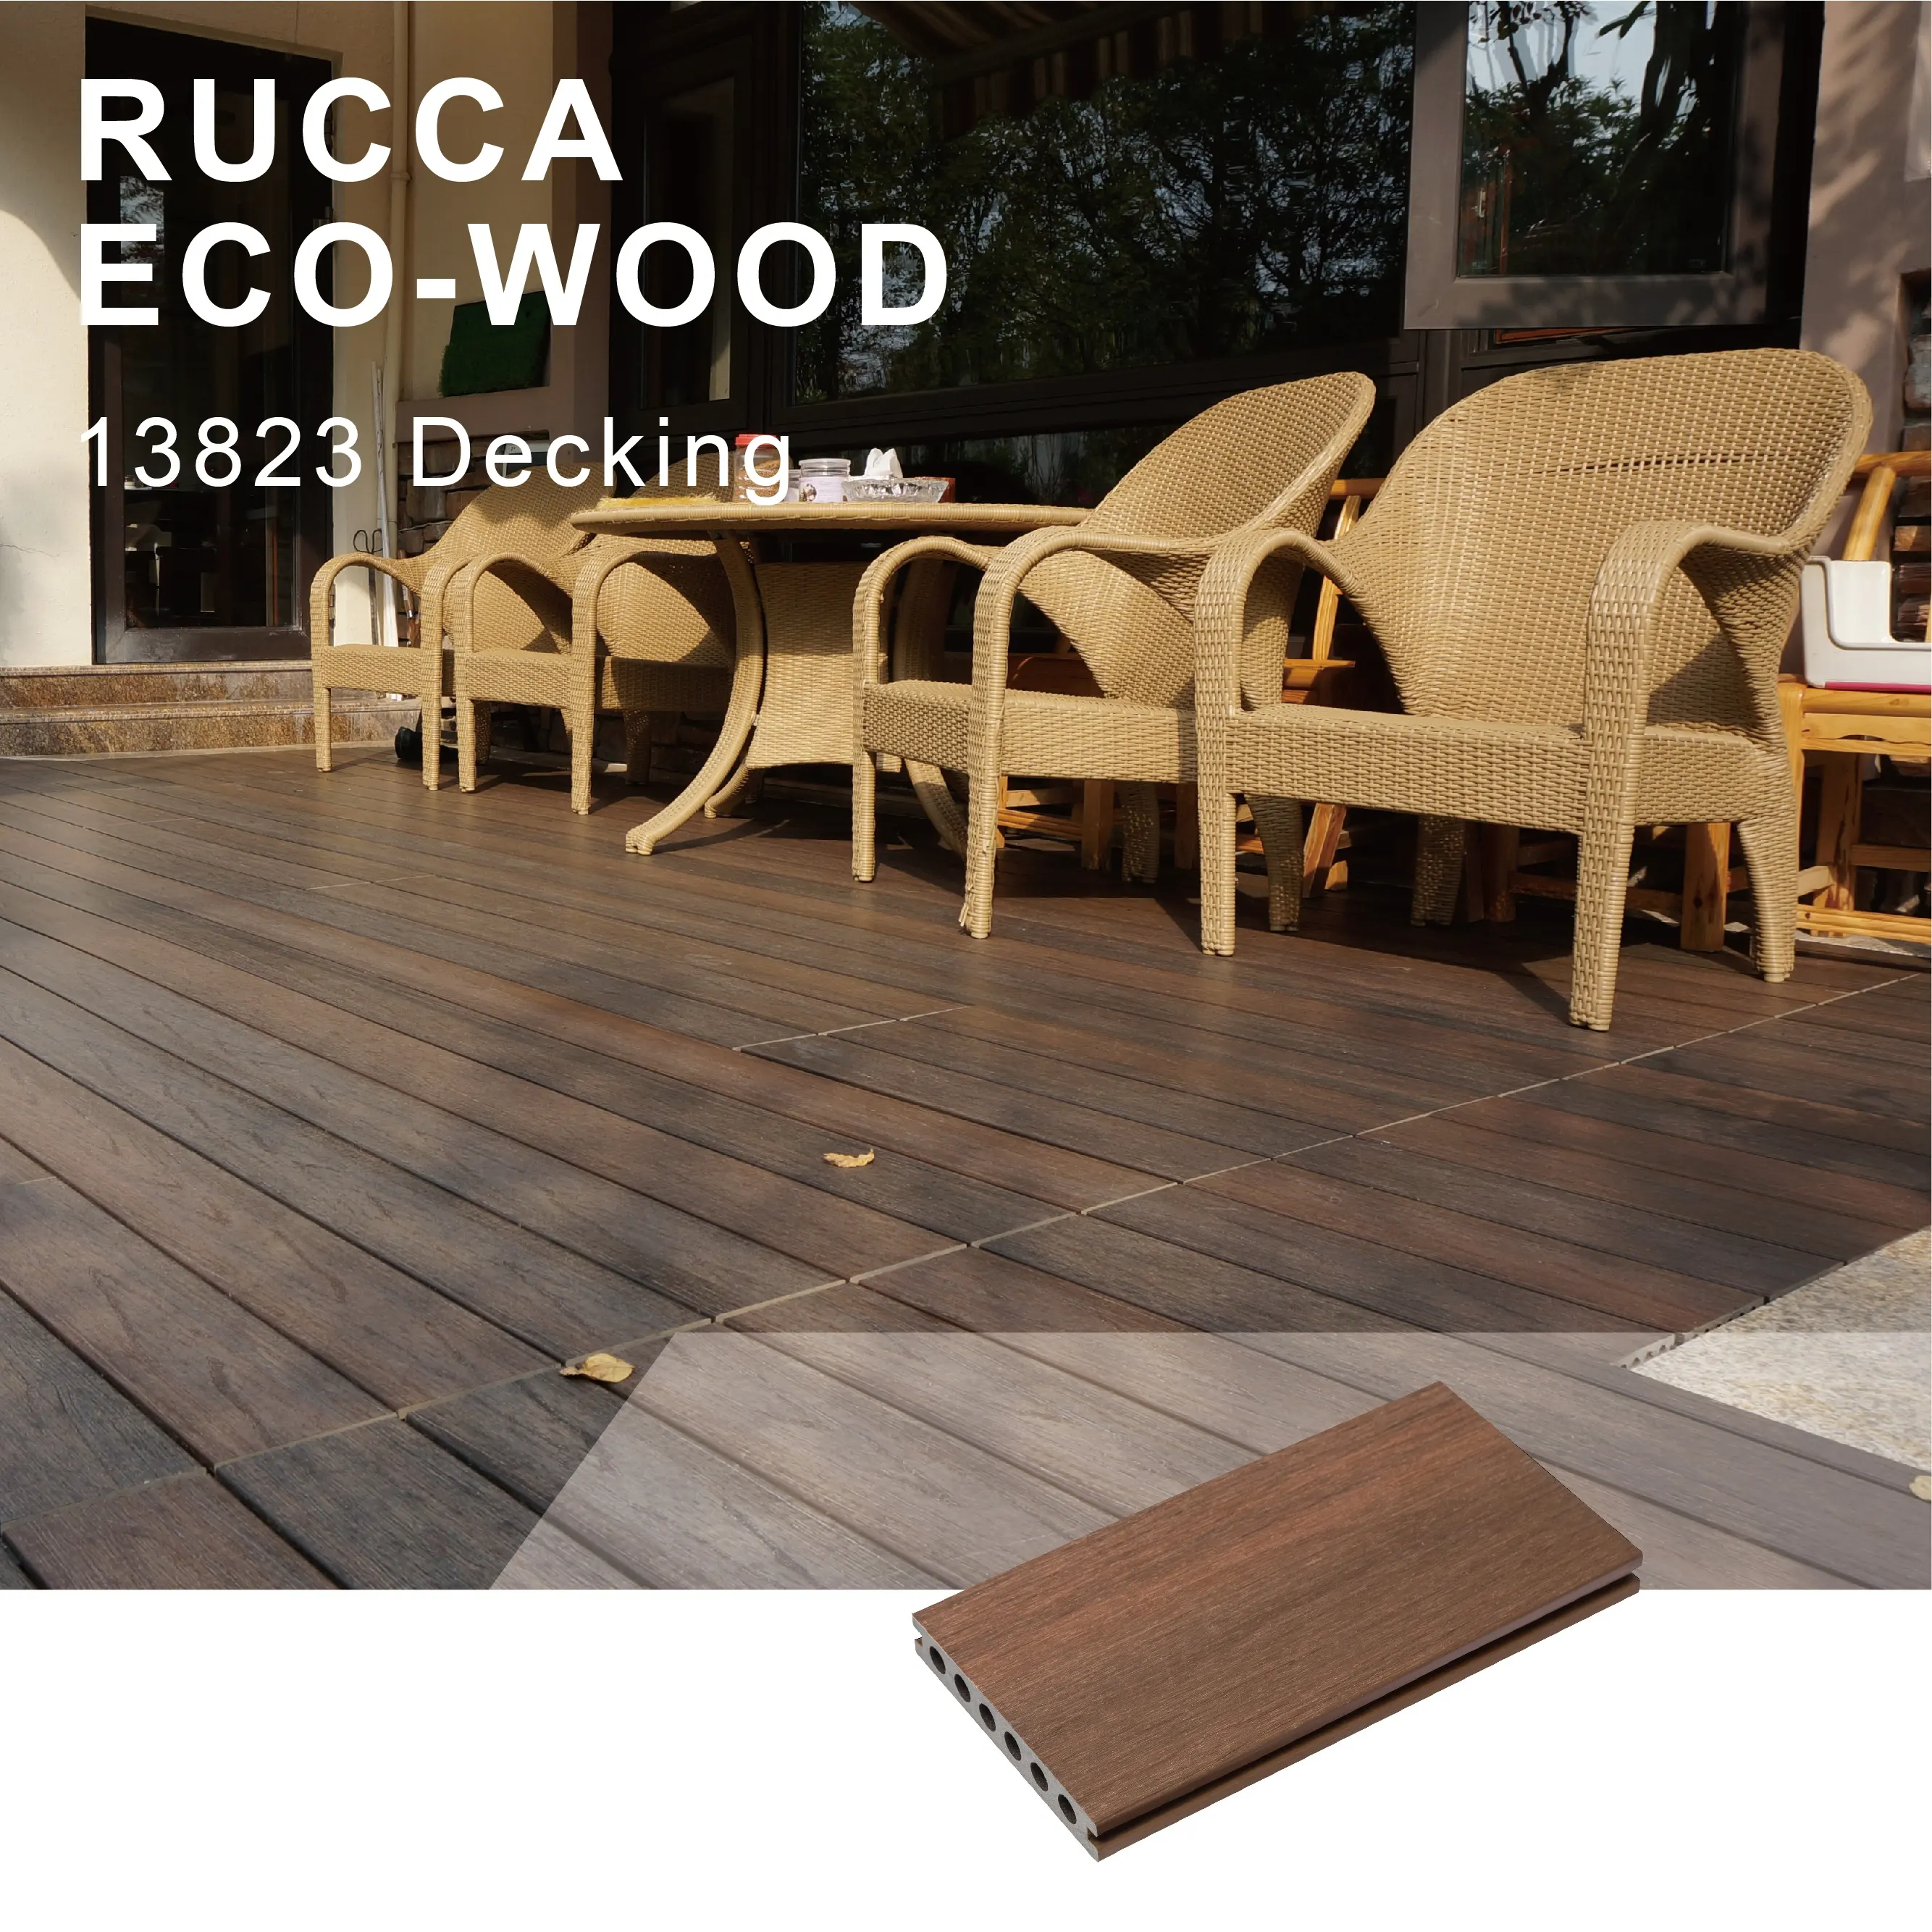 Waterproof Zhaoqing Rucca Building Material Teak Garden Co-Extrusion Decking With Low Price